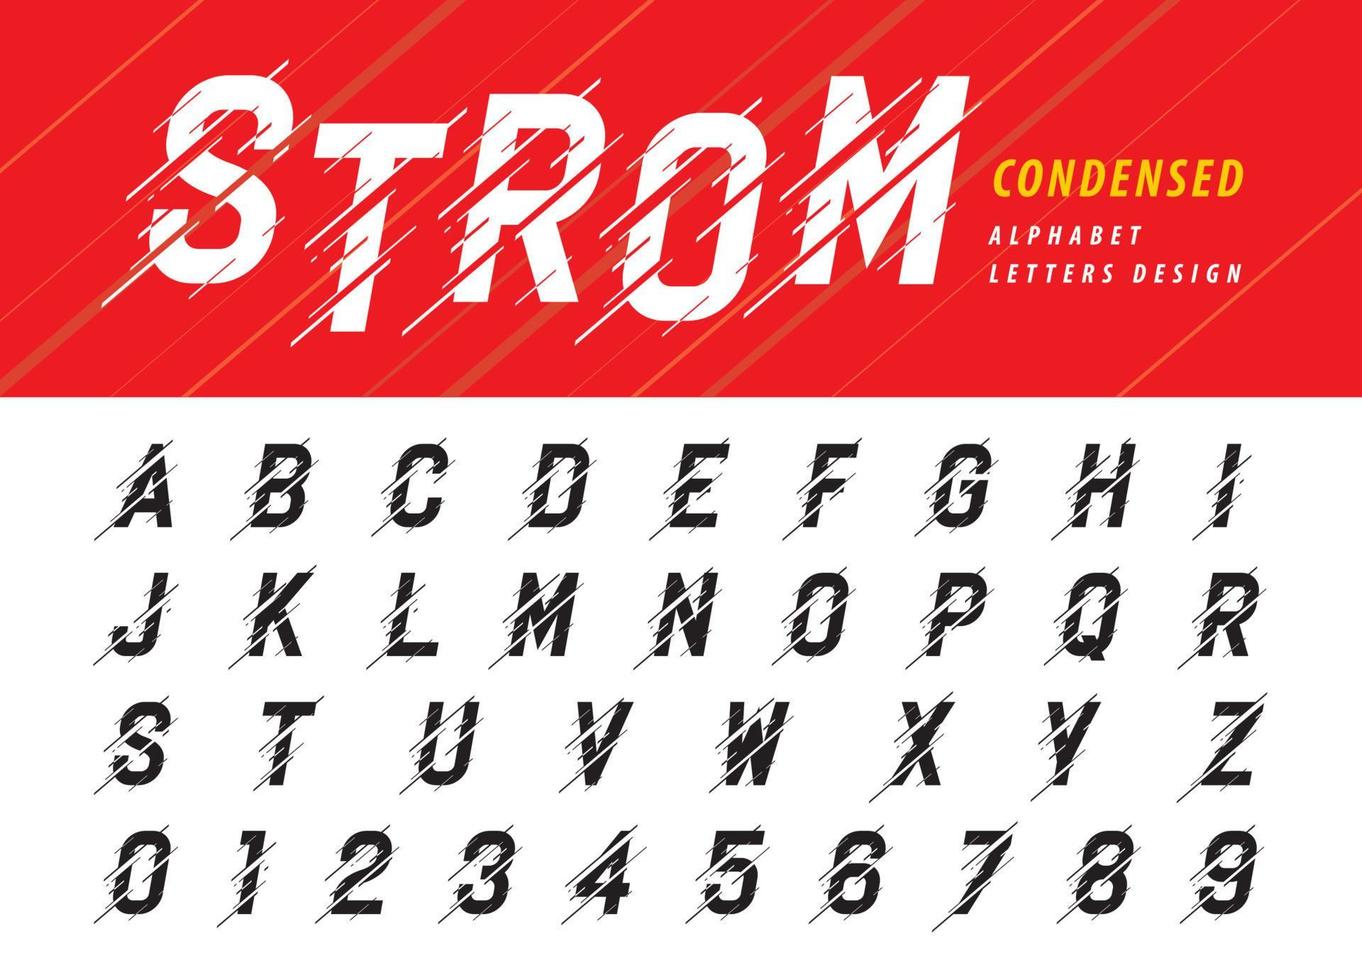 Moving Storm Letter Condensed italic stylized fonts, Glitch Modern Alphabet Letters and numbers vector